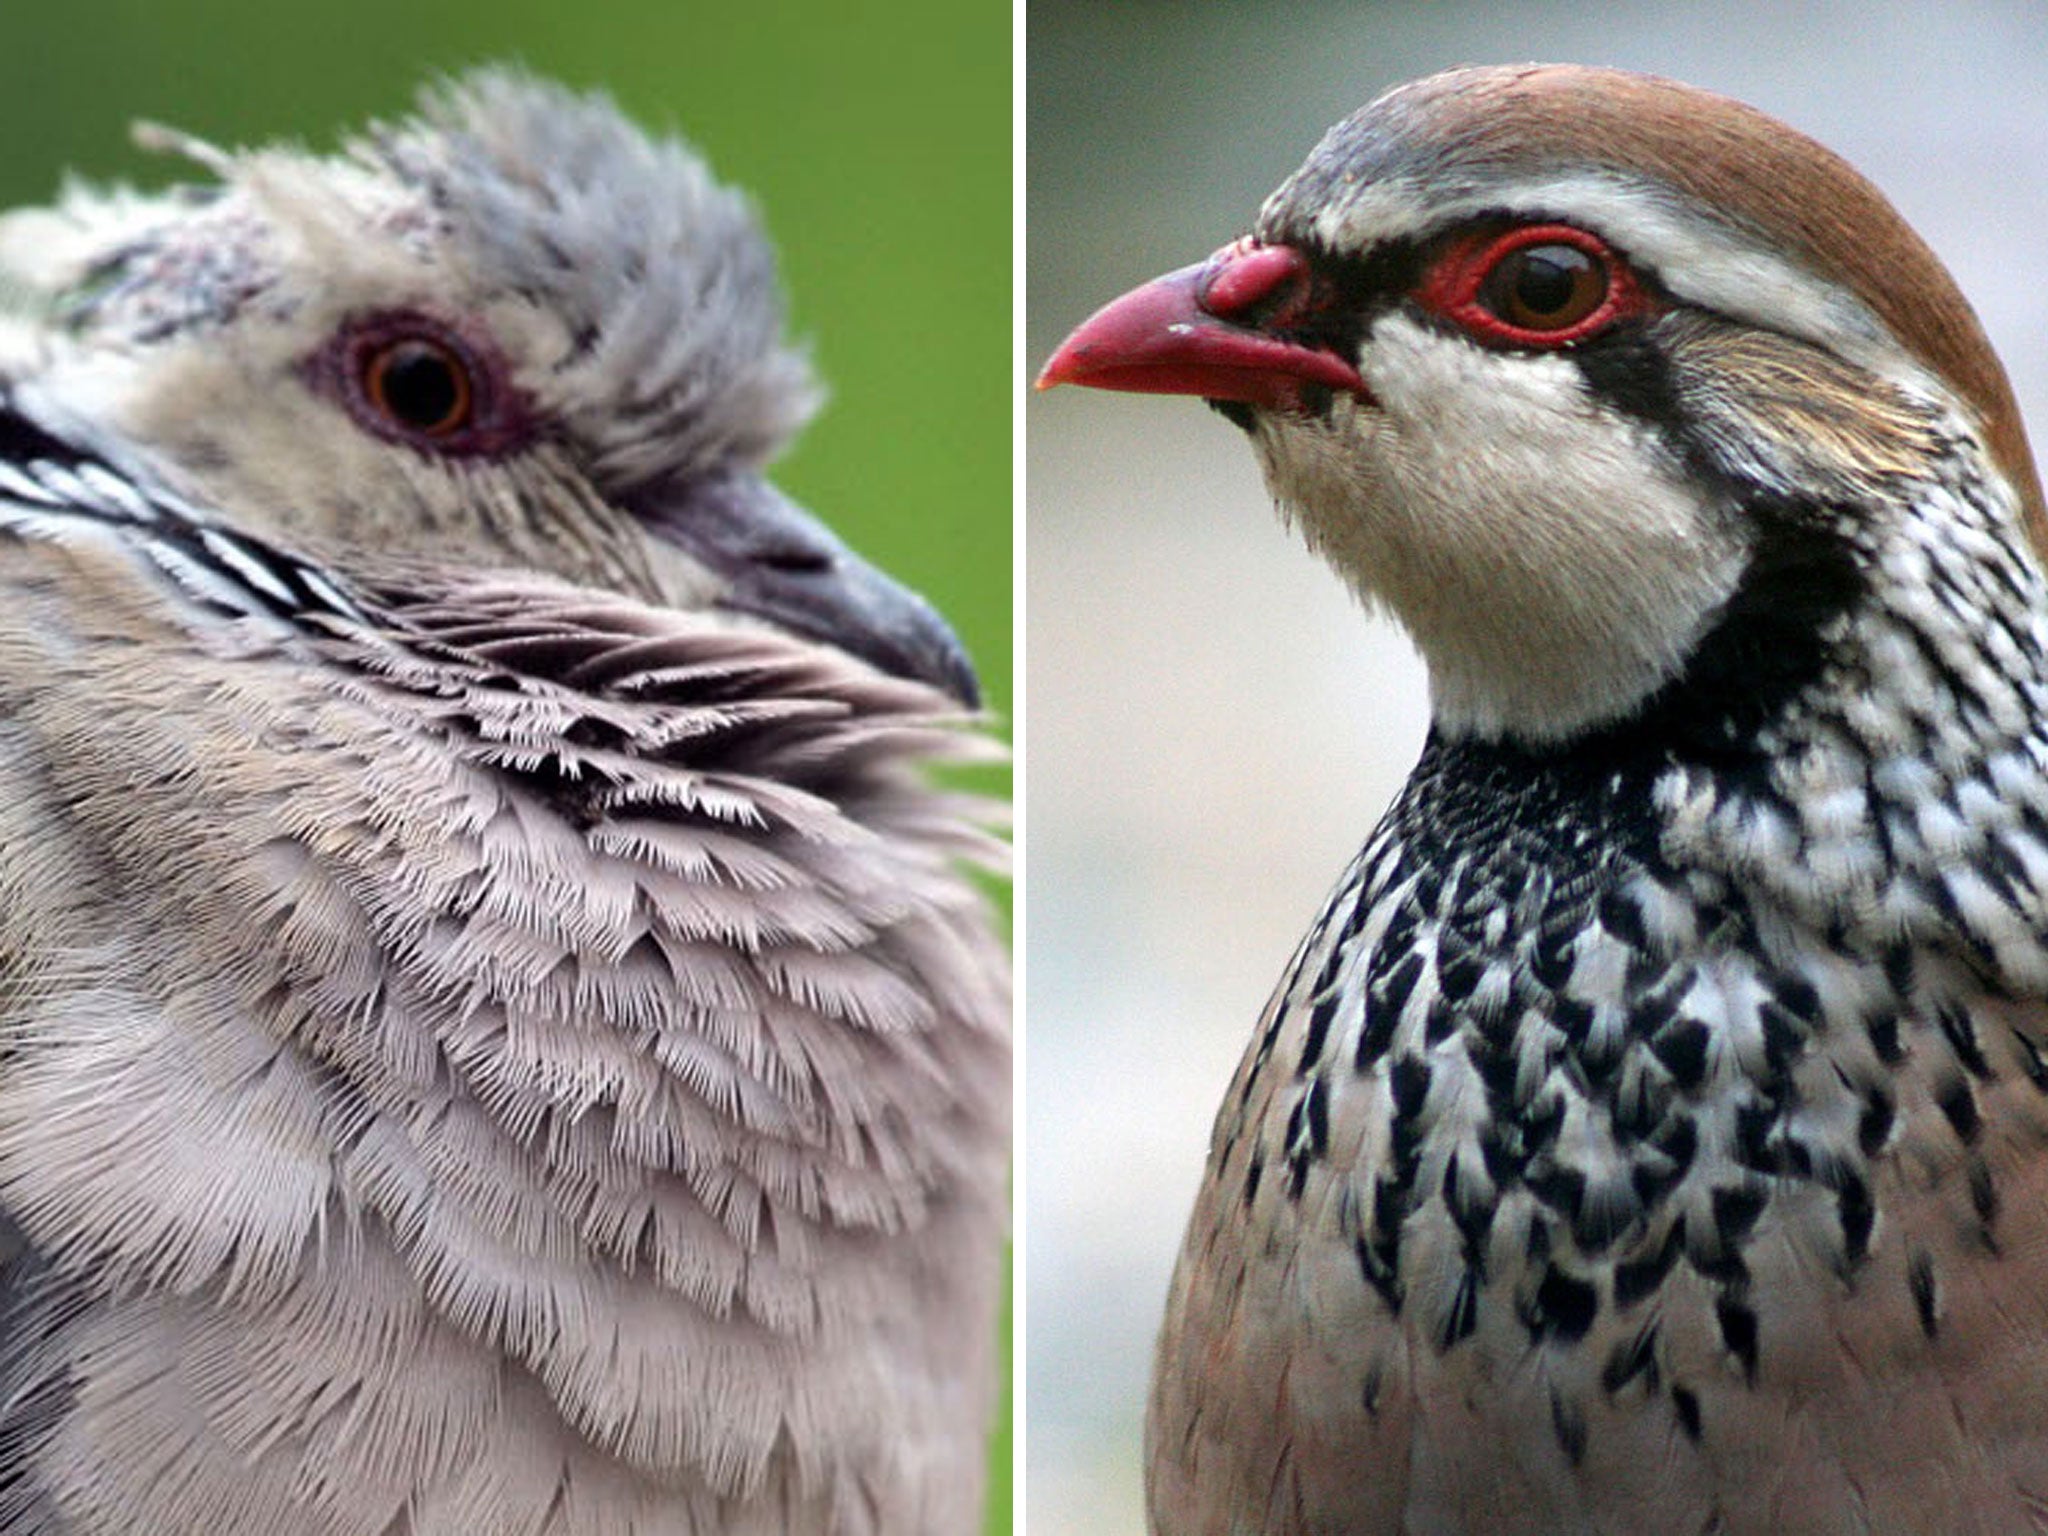 Traditional Christmas birds the Turtle Dove and Grey Partridge are disappearing from many parts of Britain